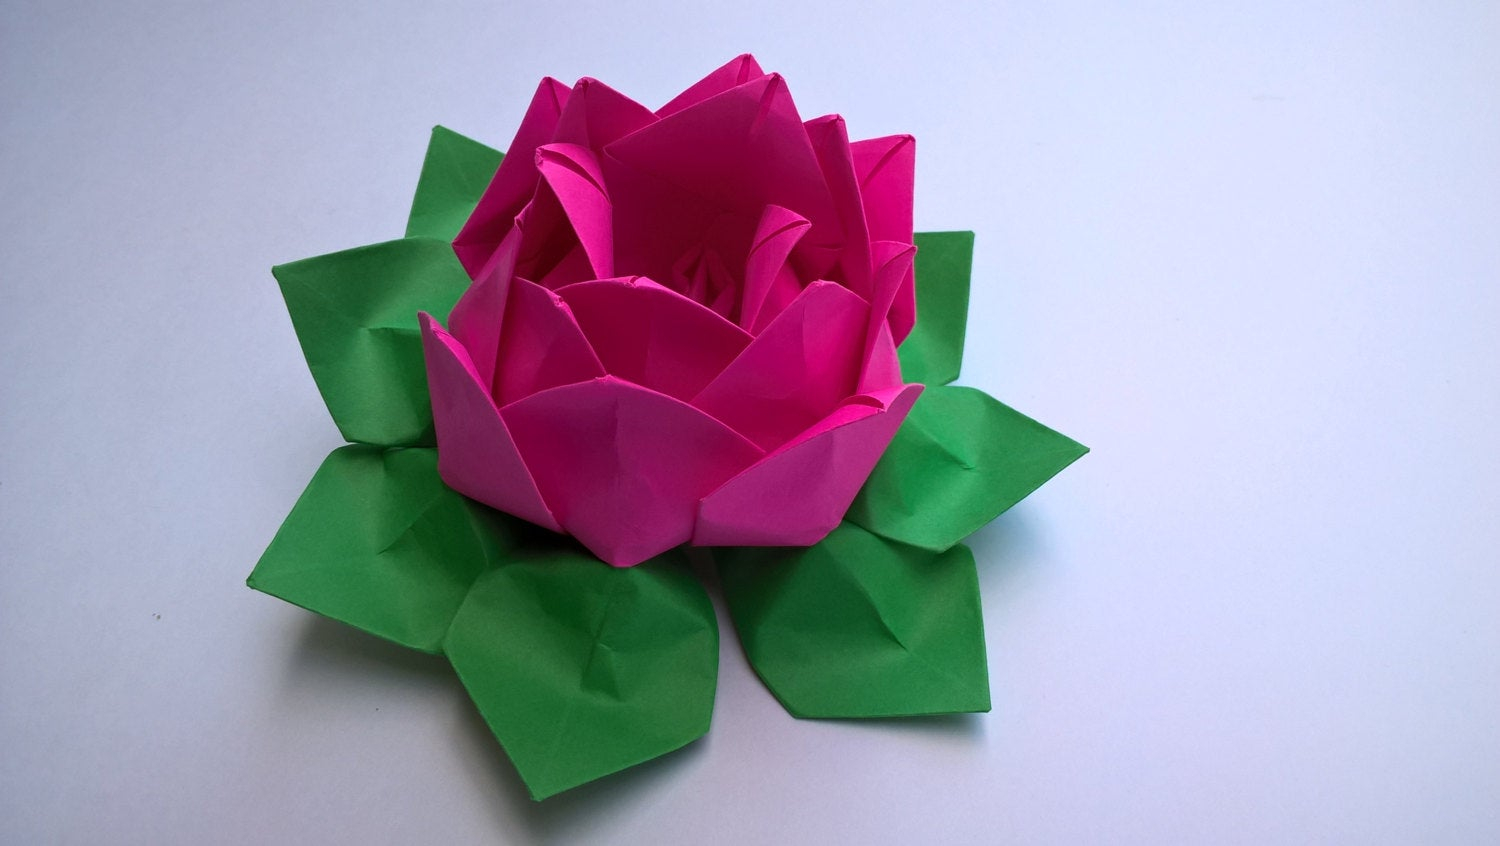 Lotus Flower Origami 2 Paper Origami Lotus Flower Waterlily You Pick The Color